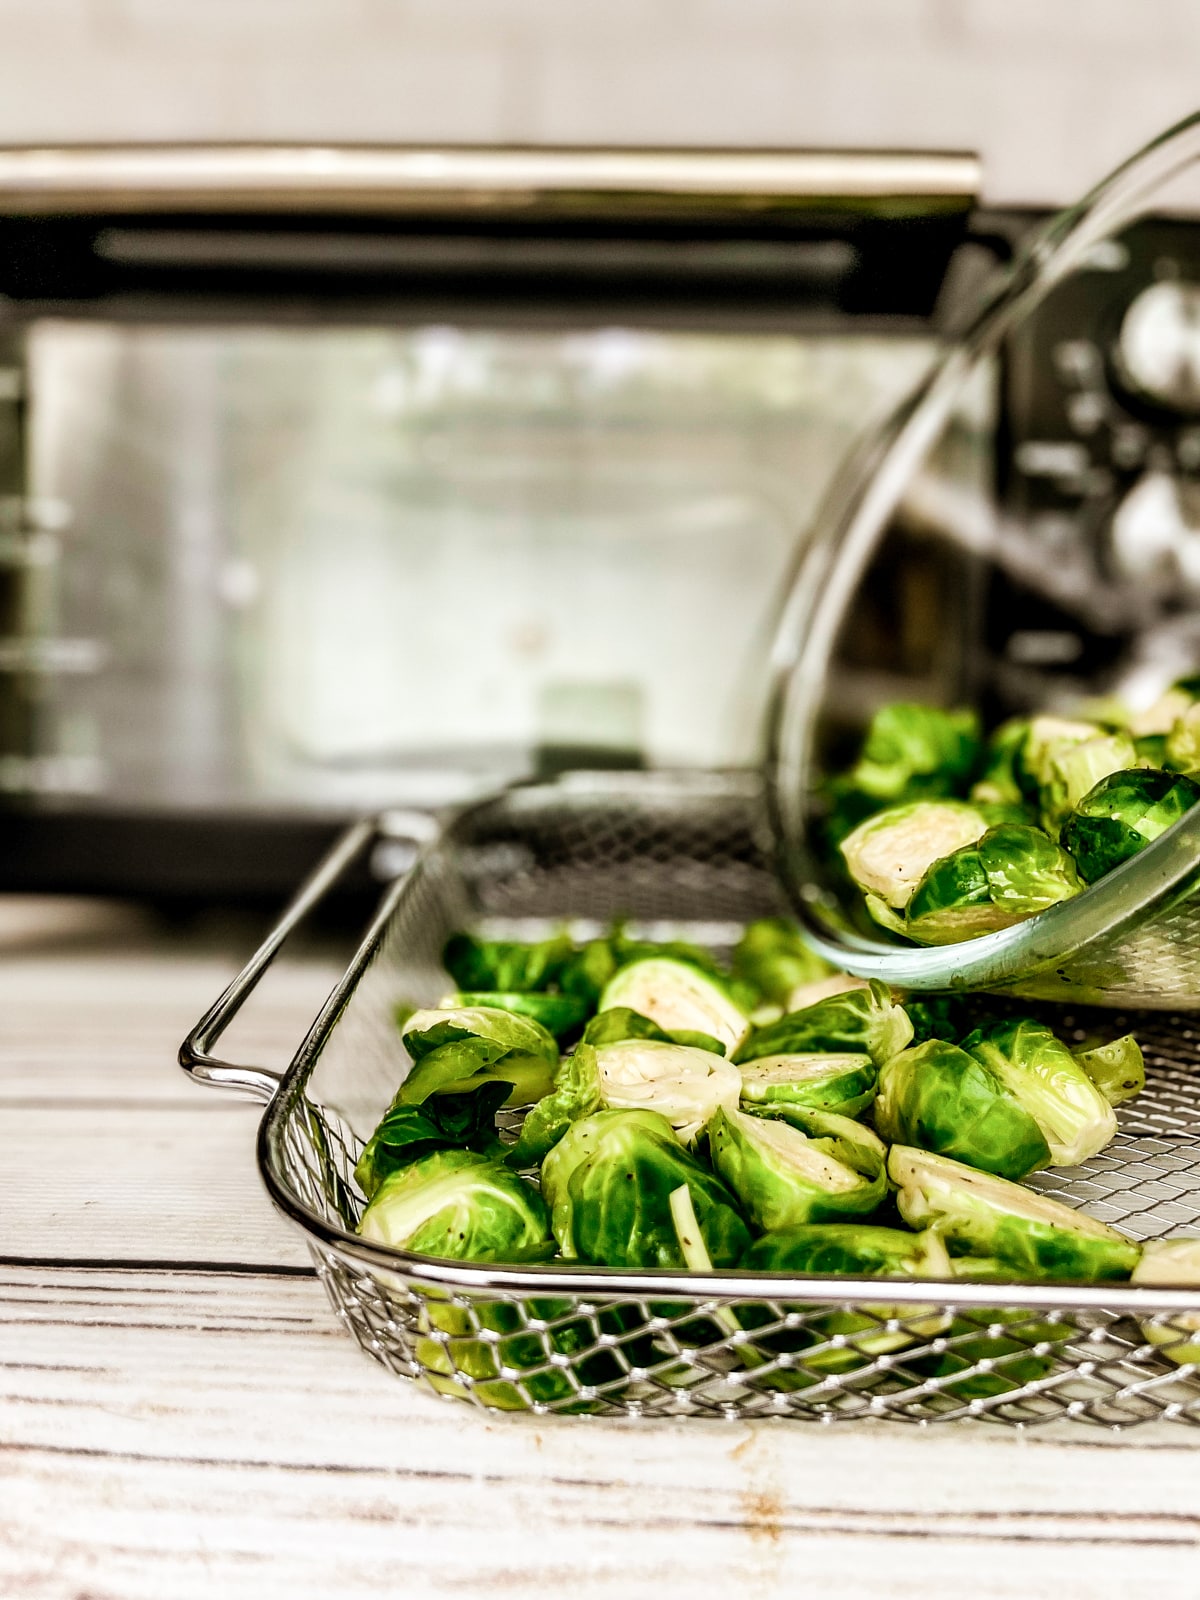 Raw, sliced brussels sprouts being poured into an air fryer basket ready to be cooked.